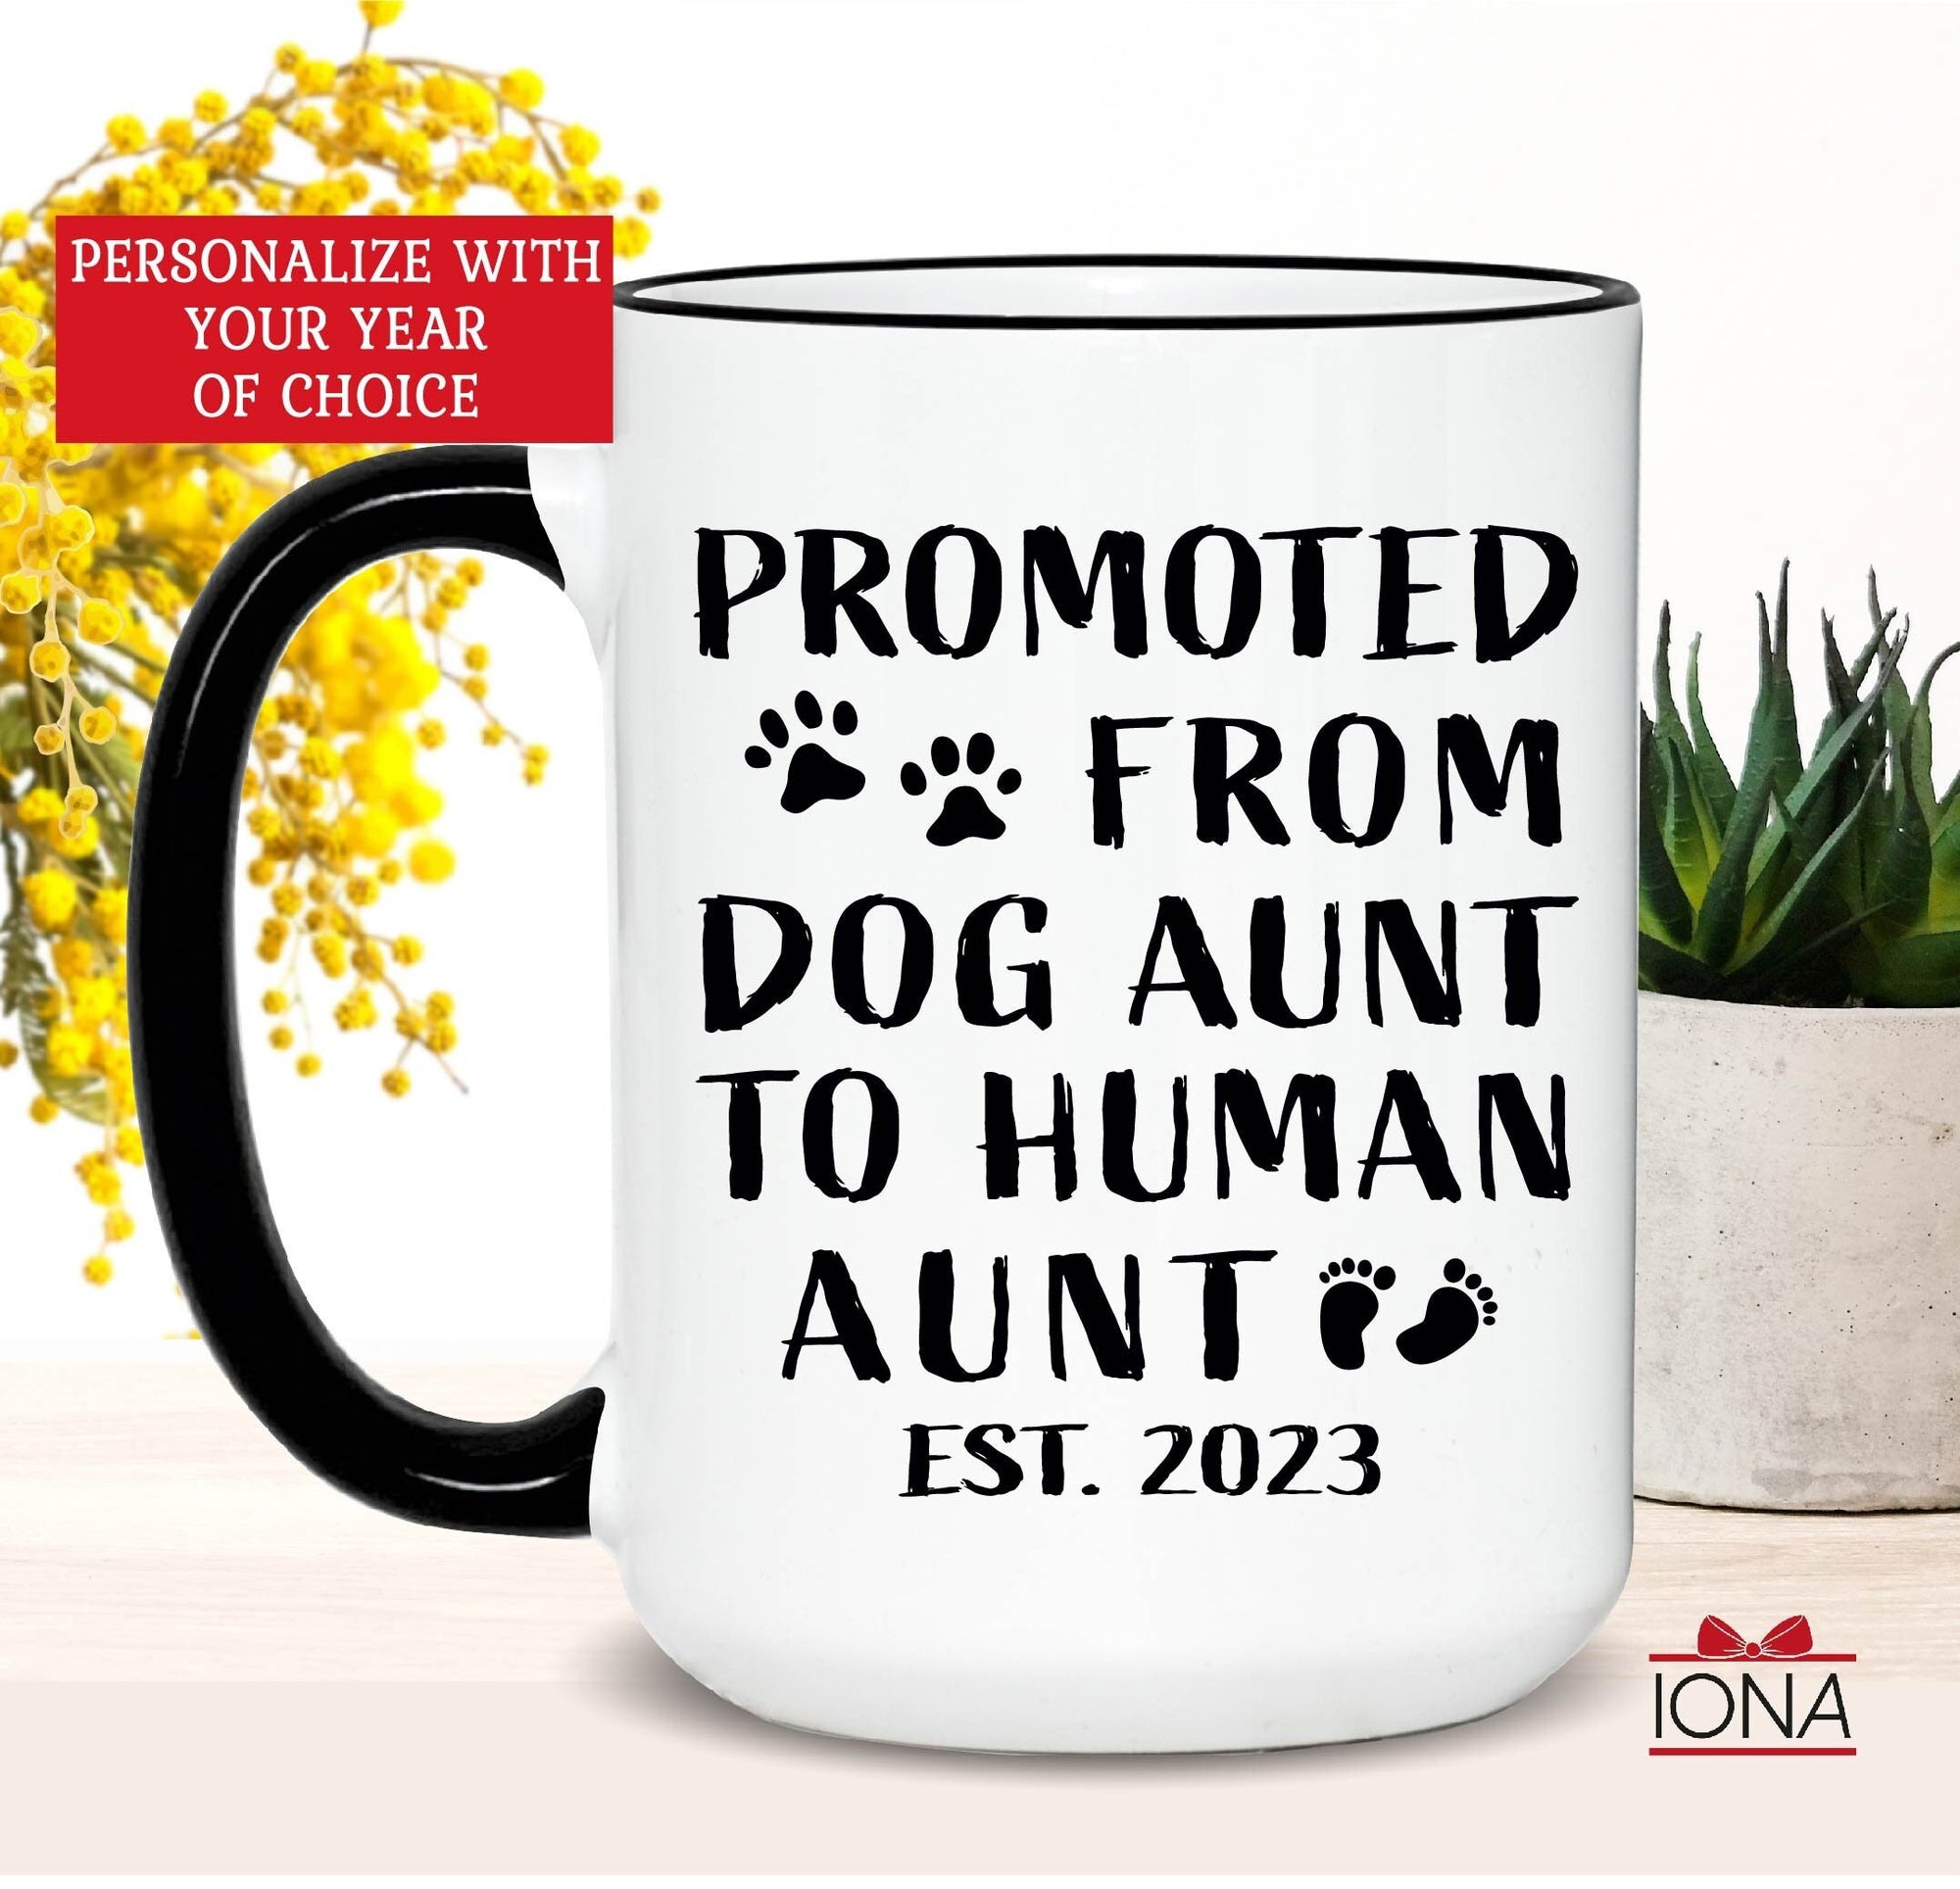 Pregnancy Announcement, New Aunt Gift, New Aunt Coffee Mug, New Aunt Promoted from Dog Aunt, Promoted to Aunt Mug, New Baby Announcement